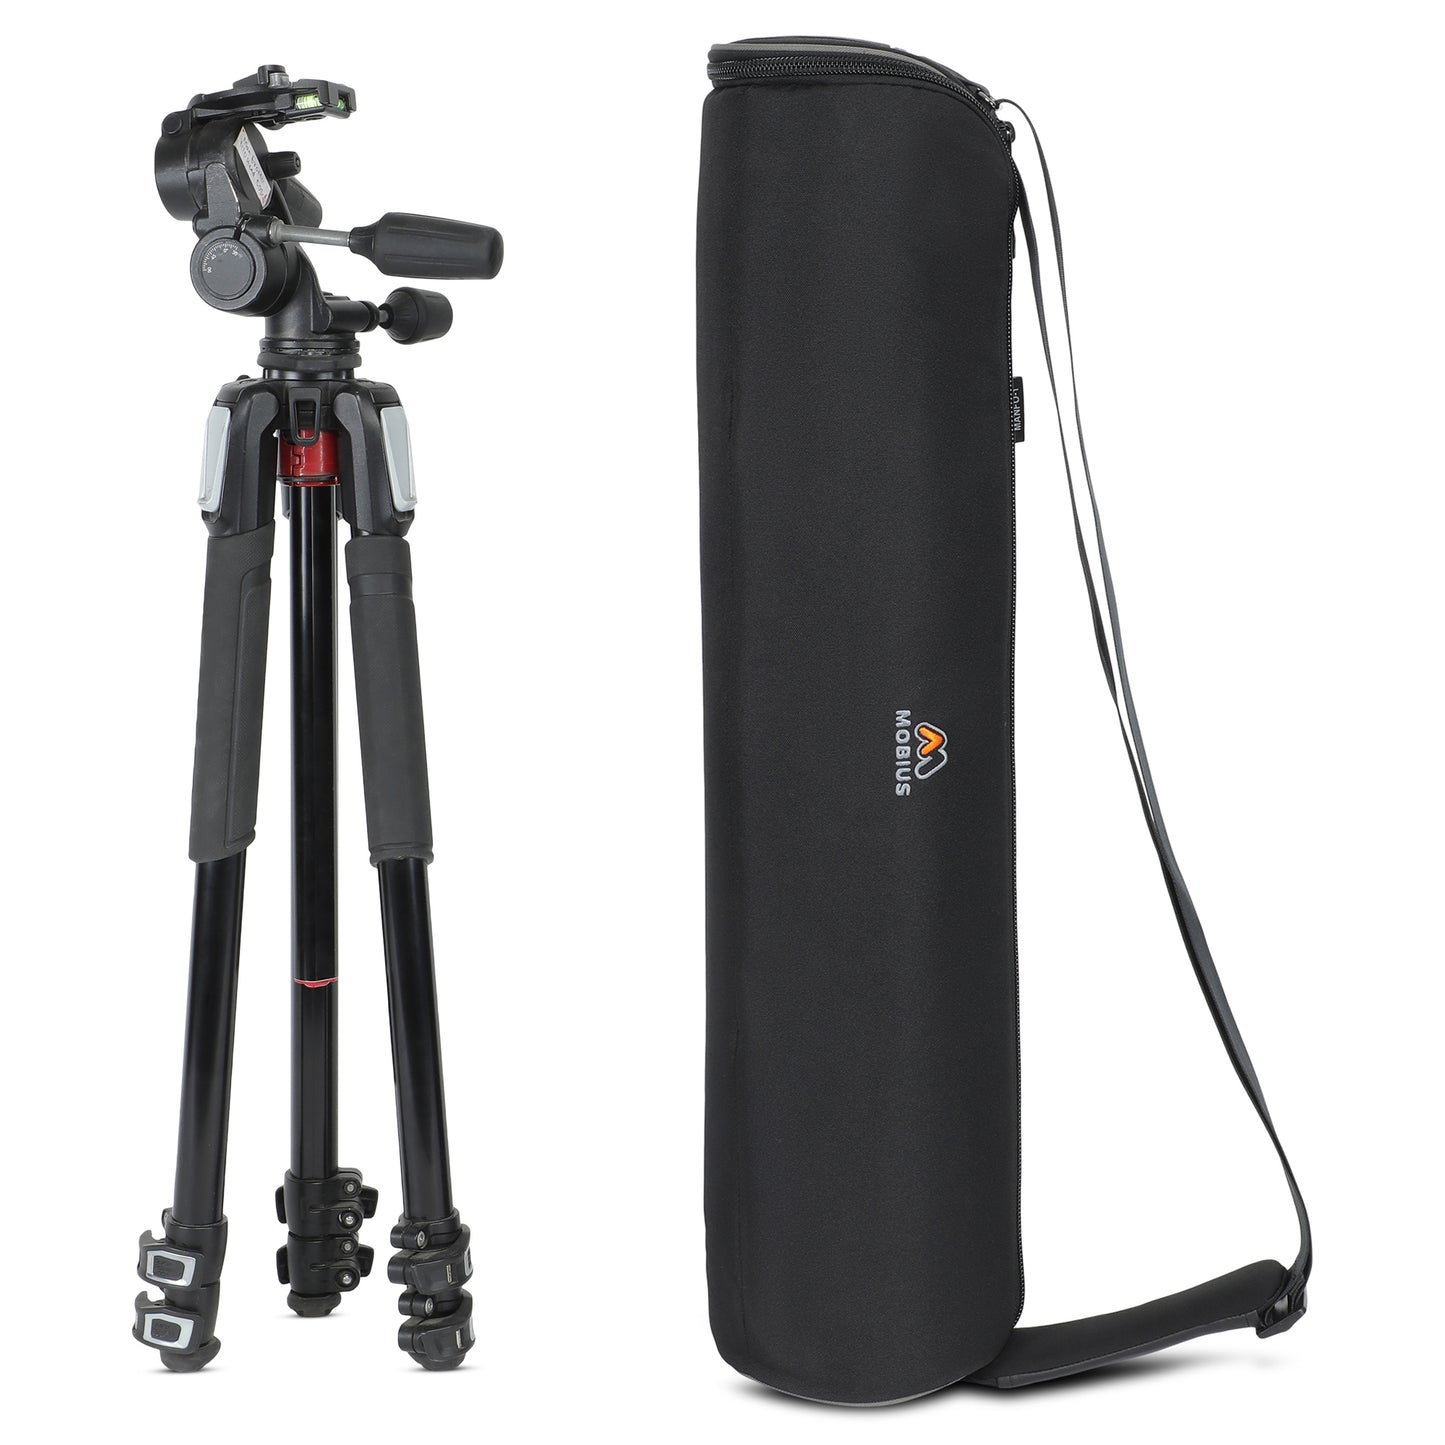 Mobius Manfo 1 Tripod and Stand Bag